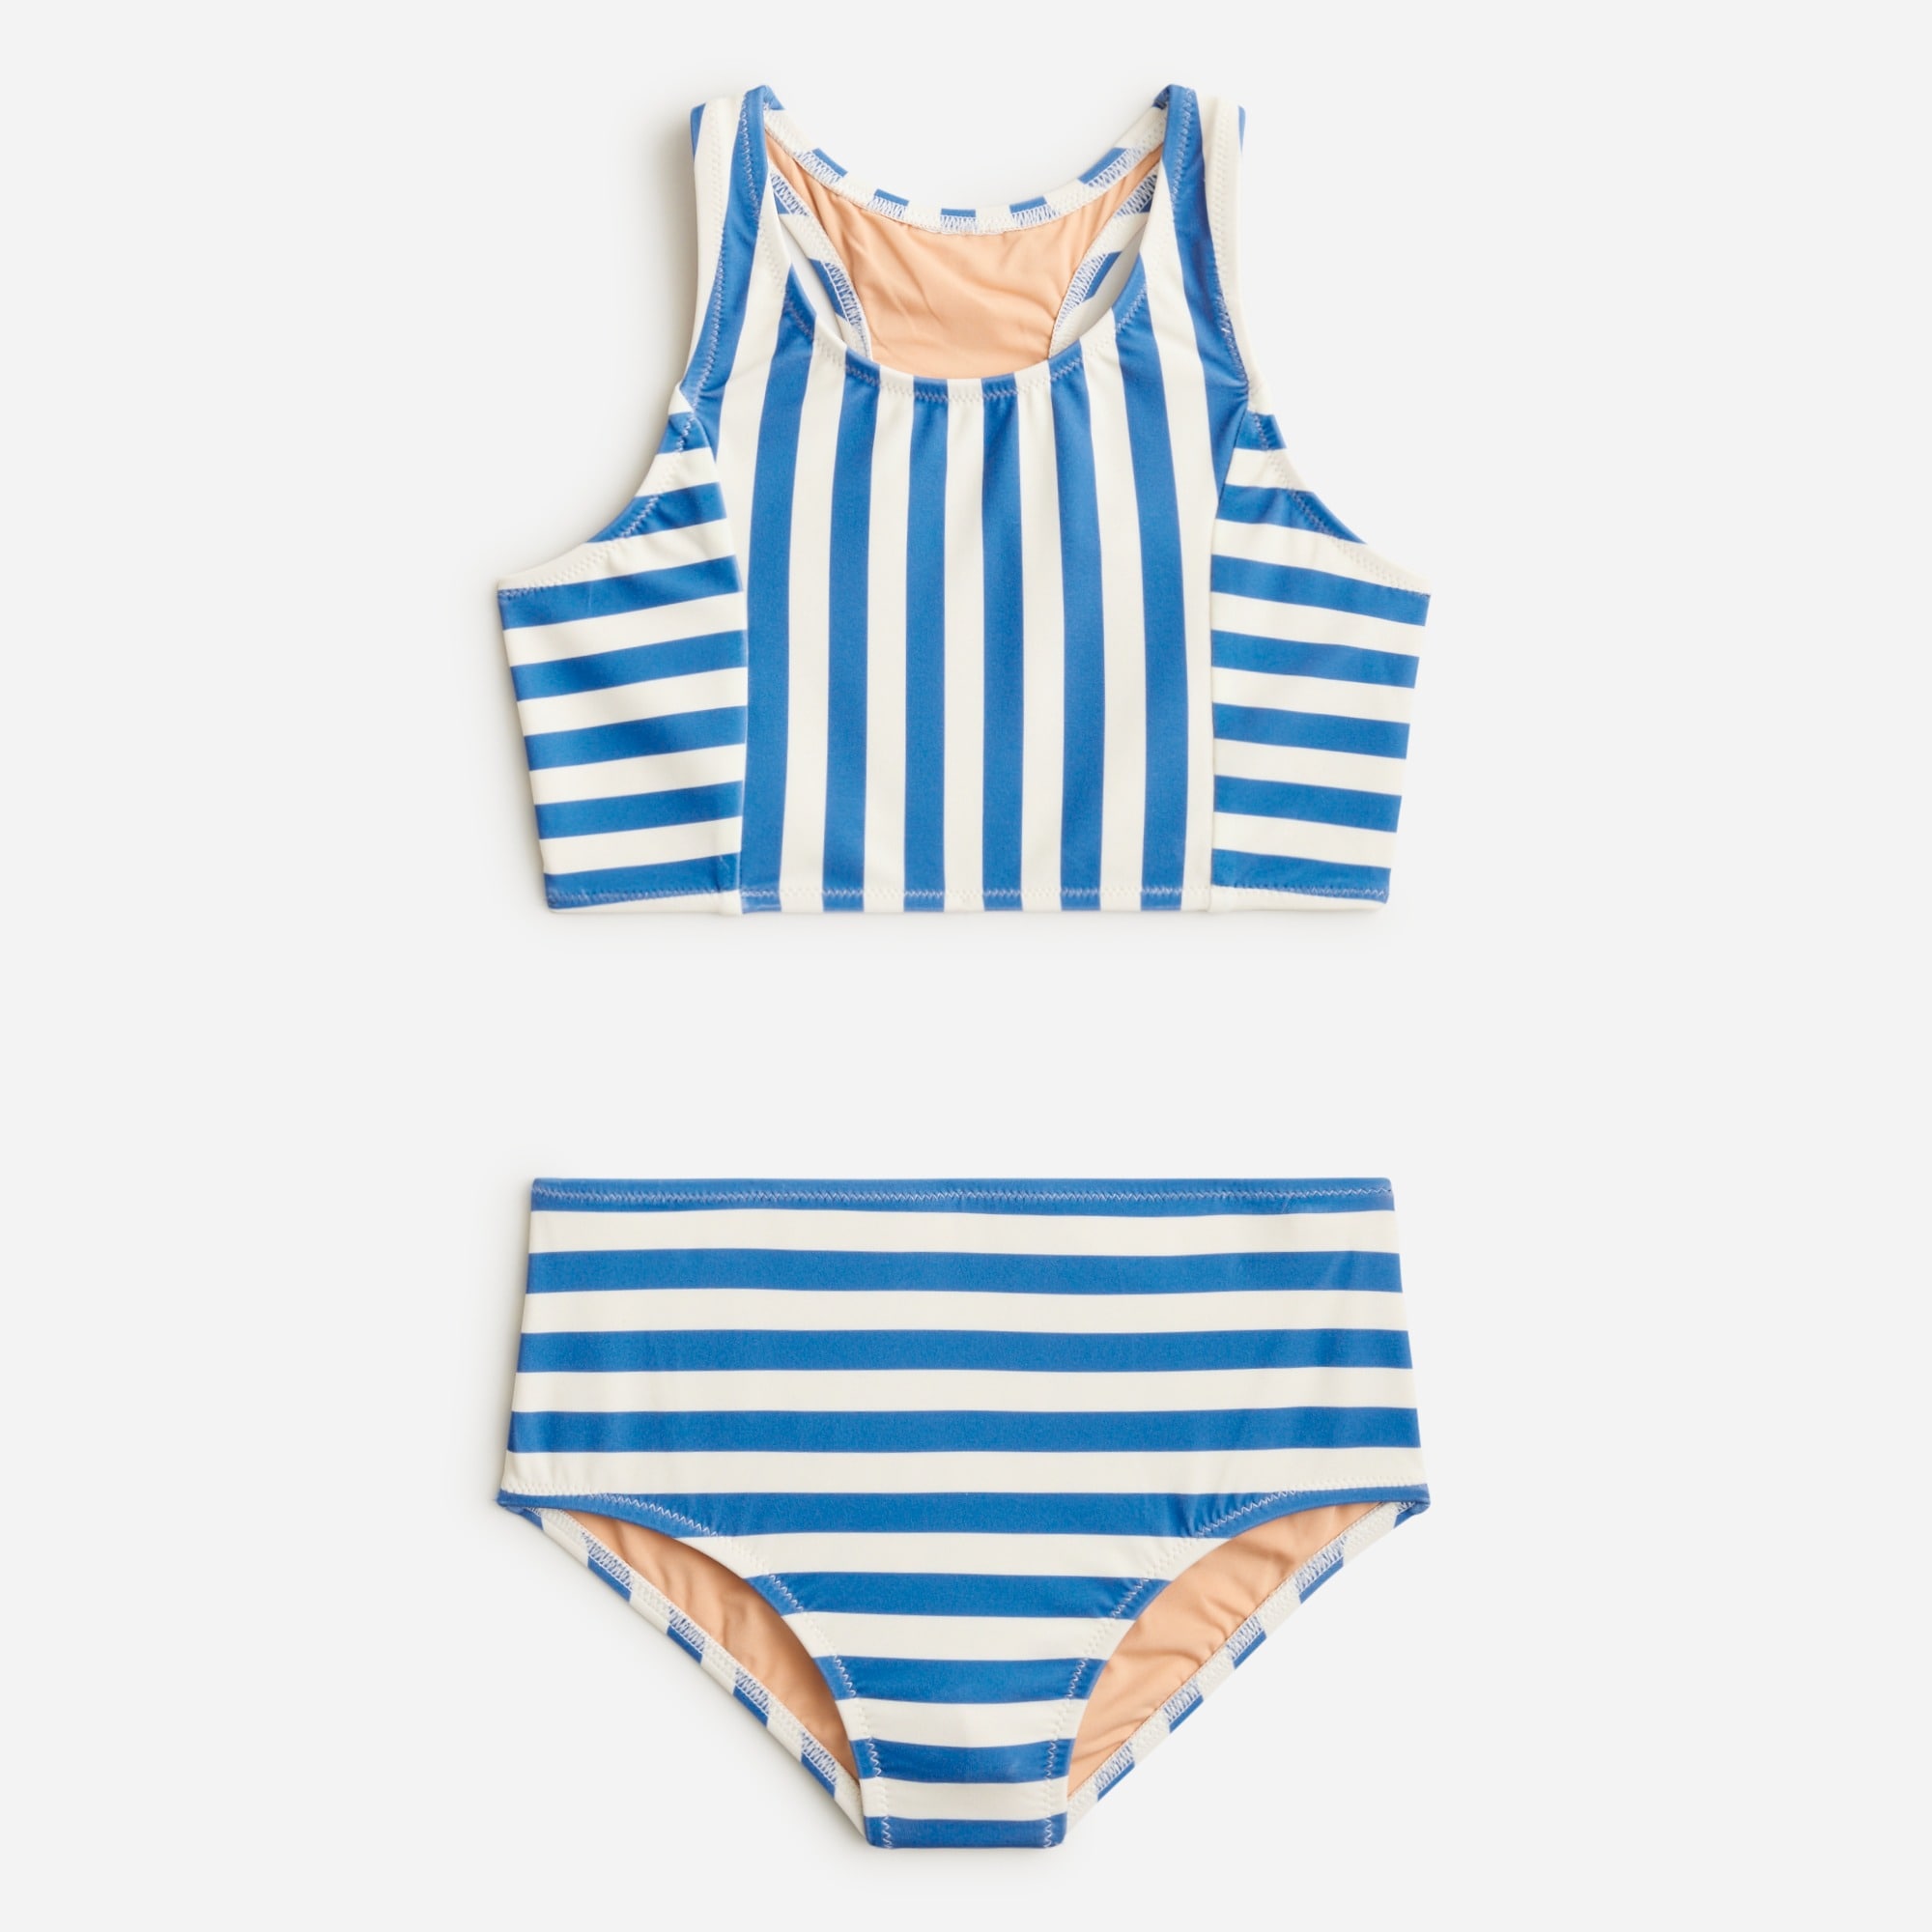  Girls' paneled two-piece swimsuit with UPF 50+